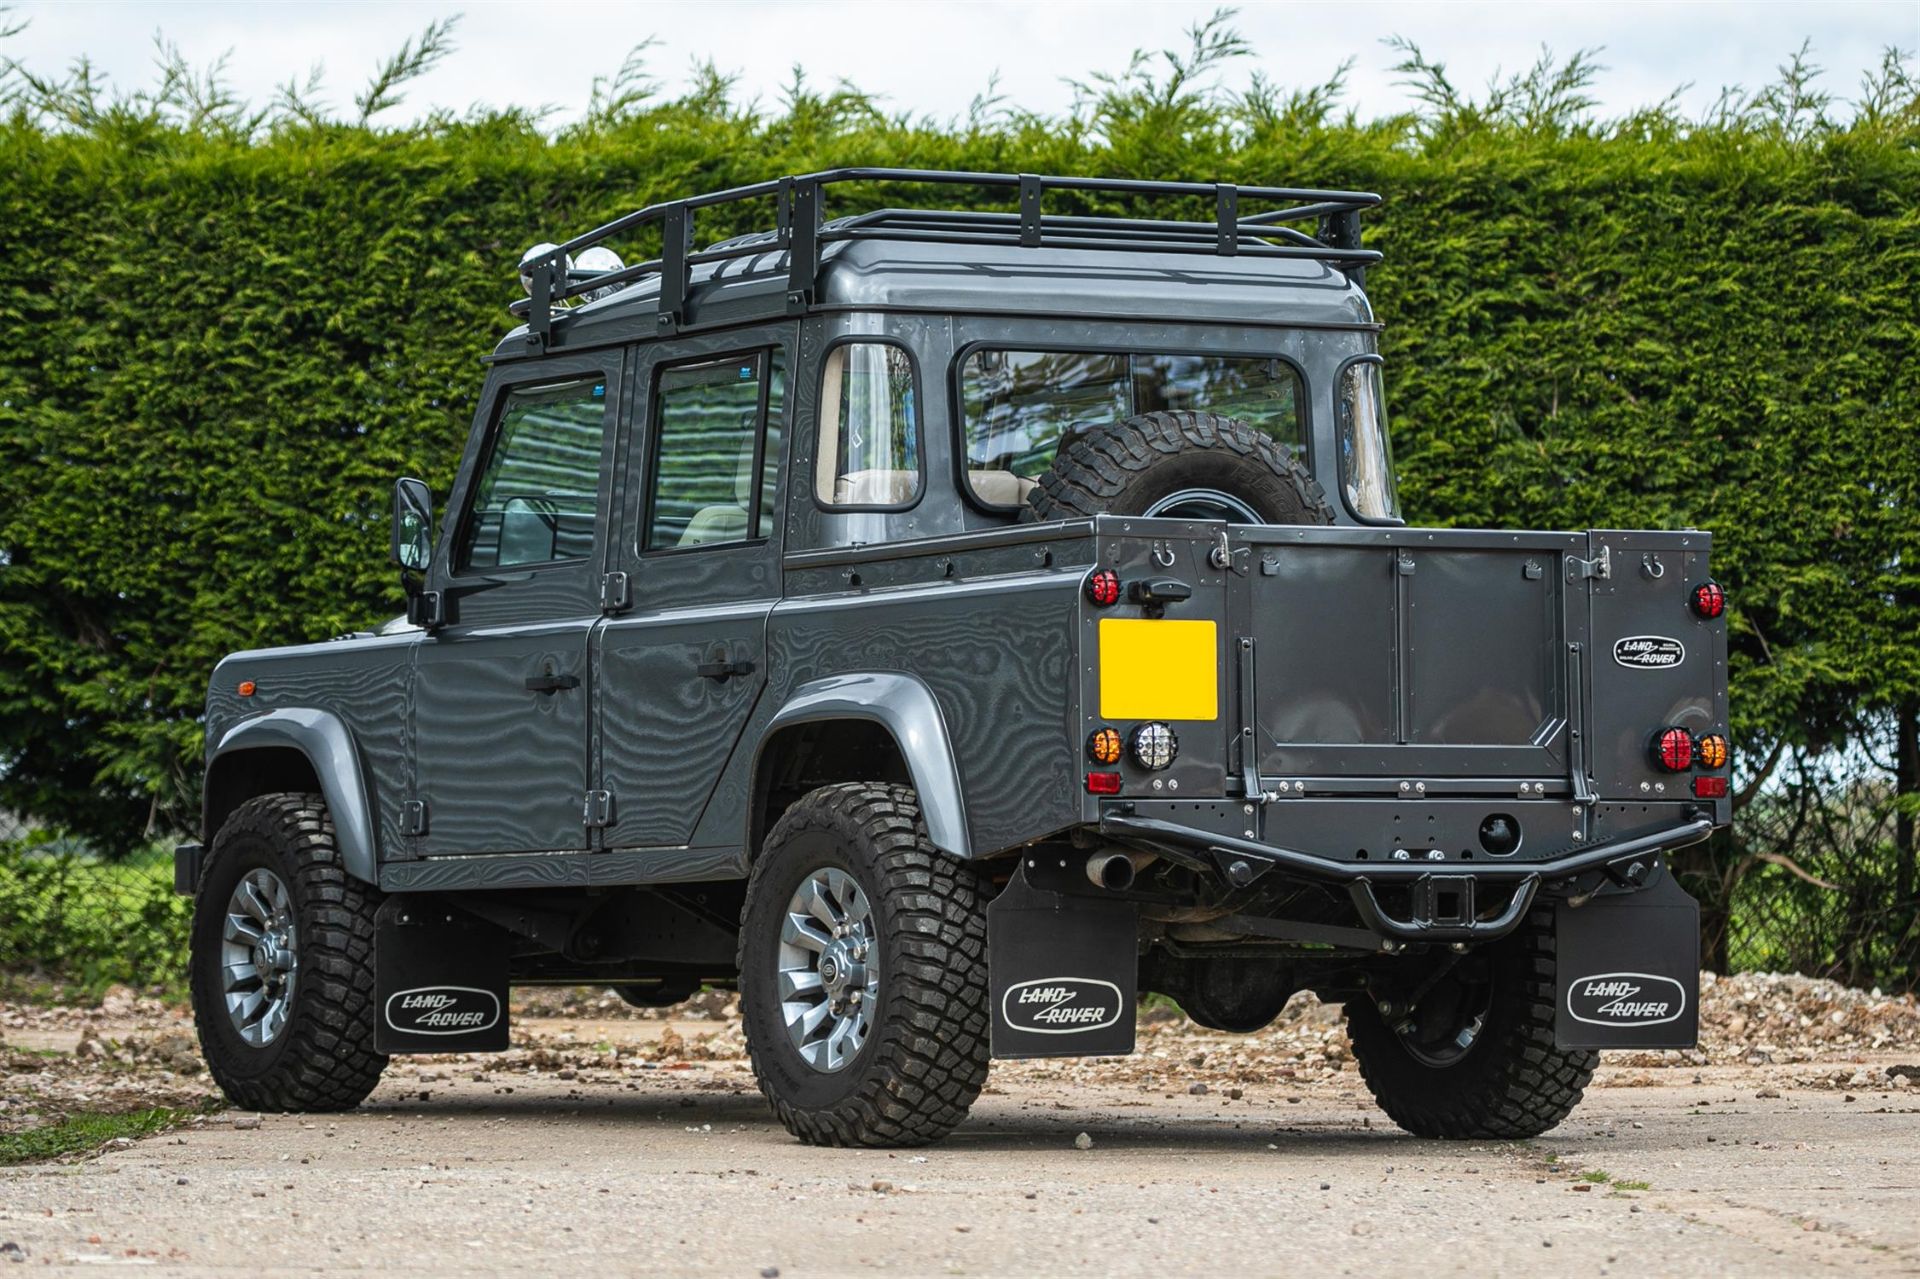 2002 Land Rover Defender 110 TD5 Double-Cab - Image 4 of 10